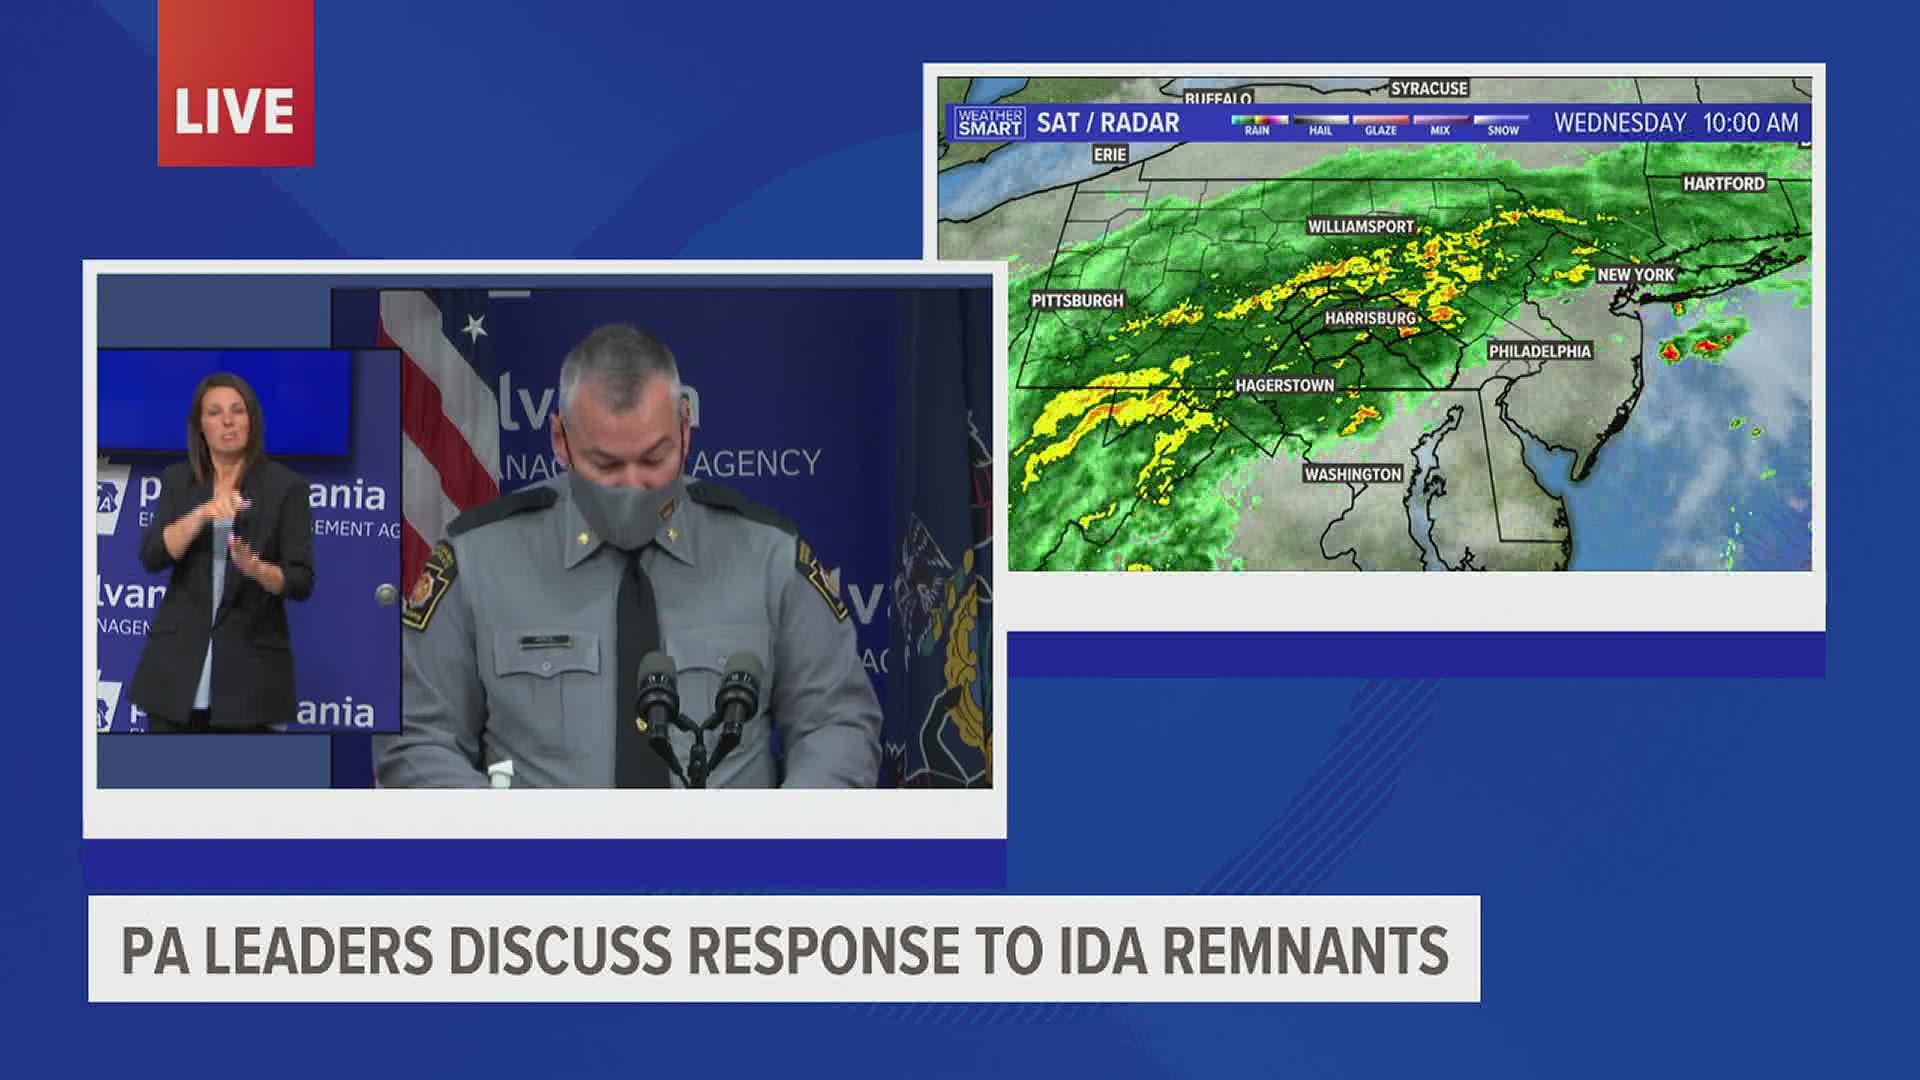 The Wolf Administration is providing an update on the state's response to the heavy rain and expected flooding in our area due to the remnants of Hurricane Ida.